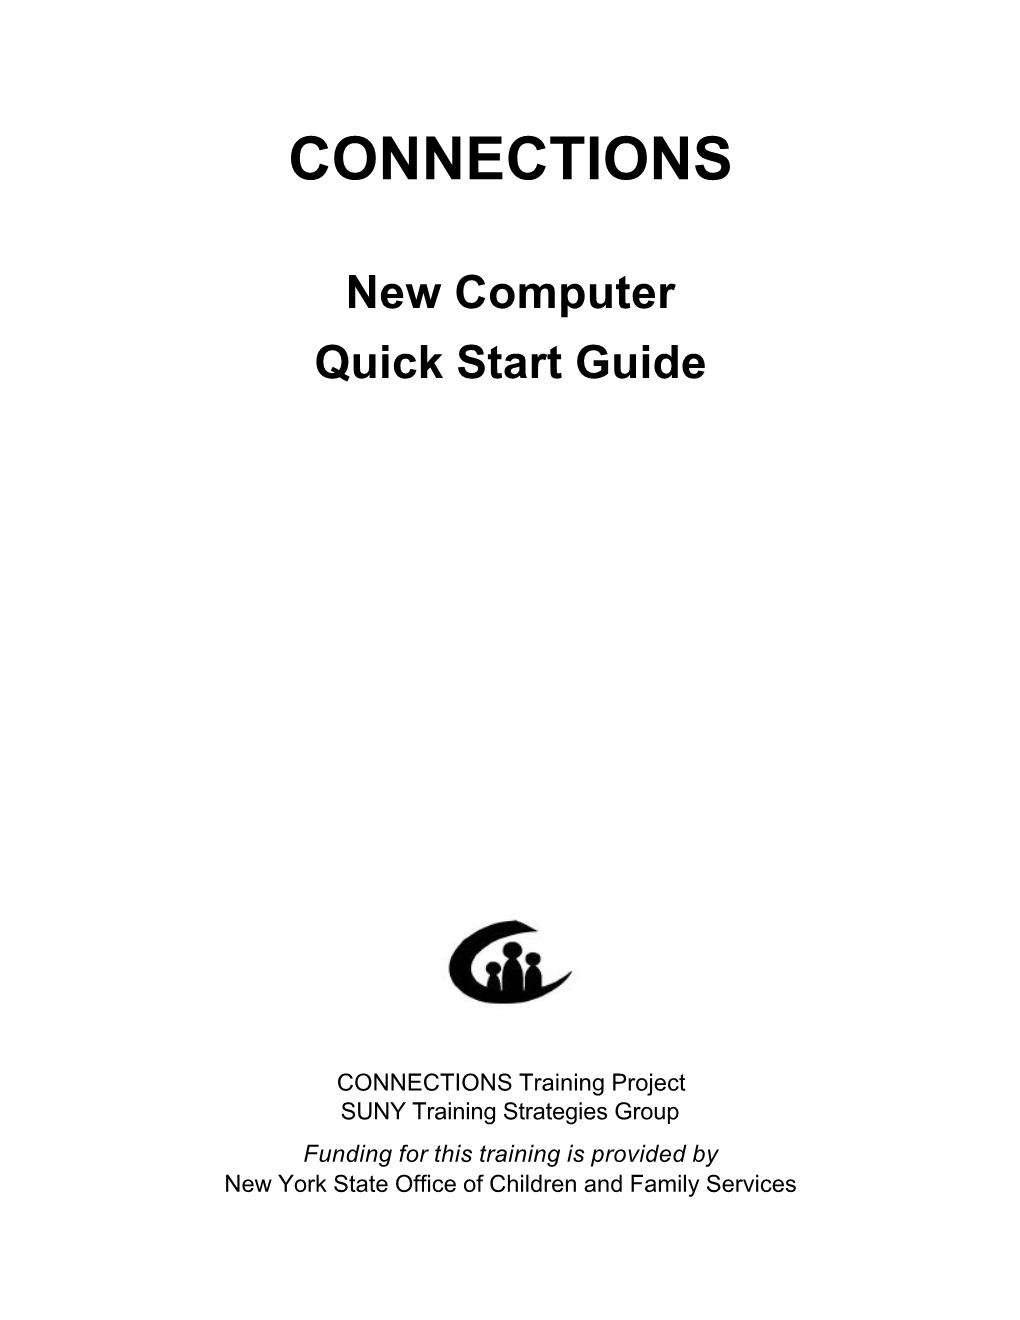 PC Quick Start Guide